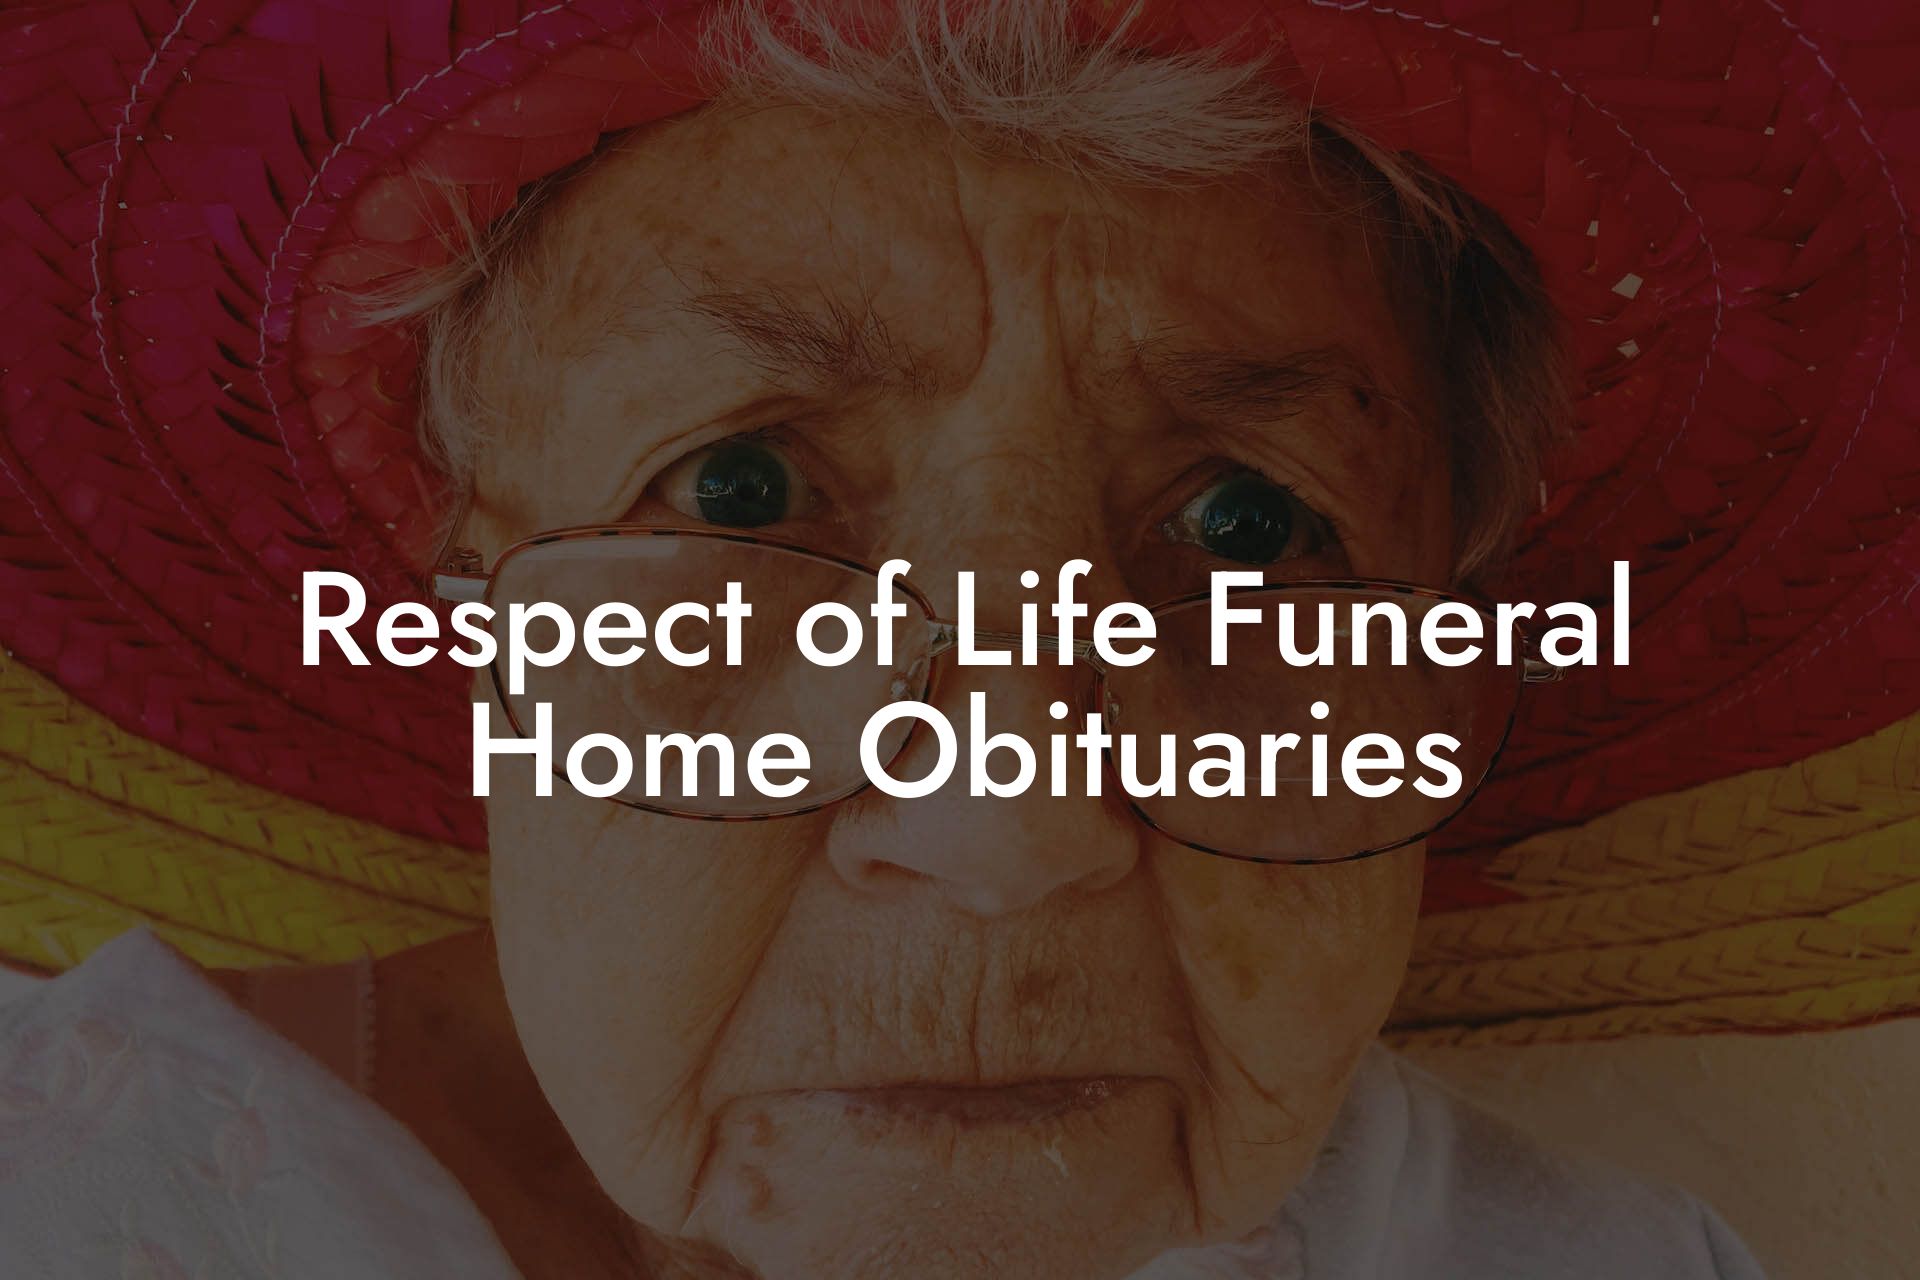 Respect of Life Funeral Home Obituaries